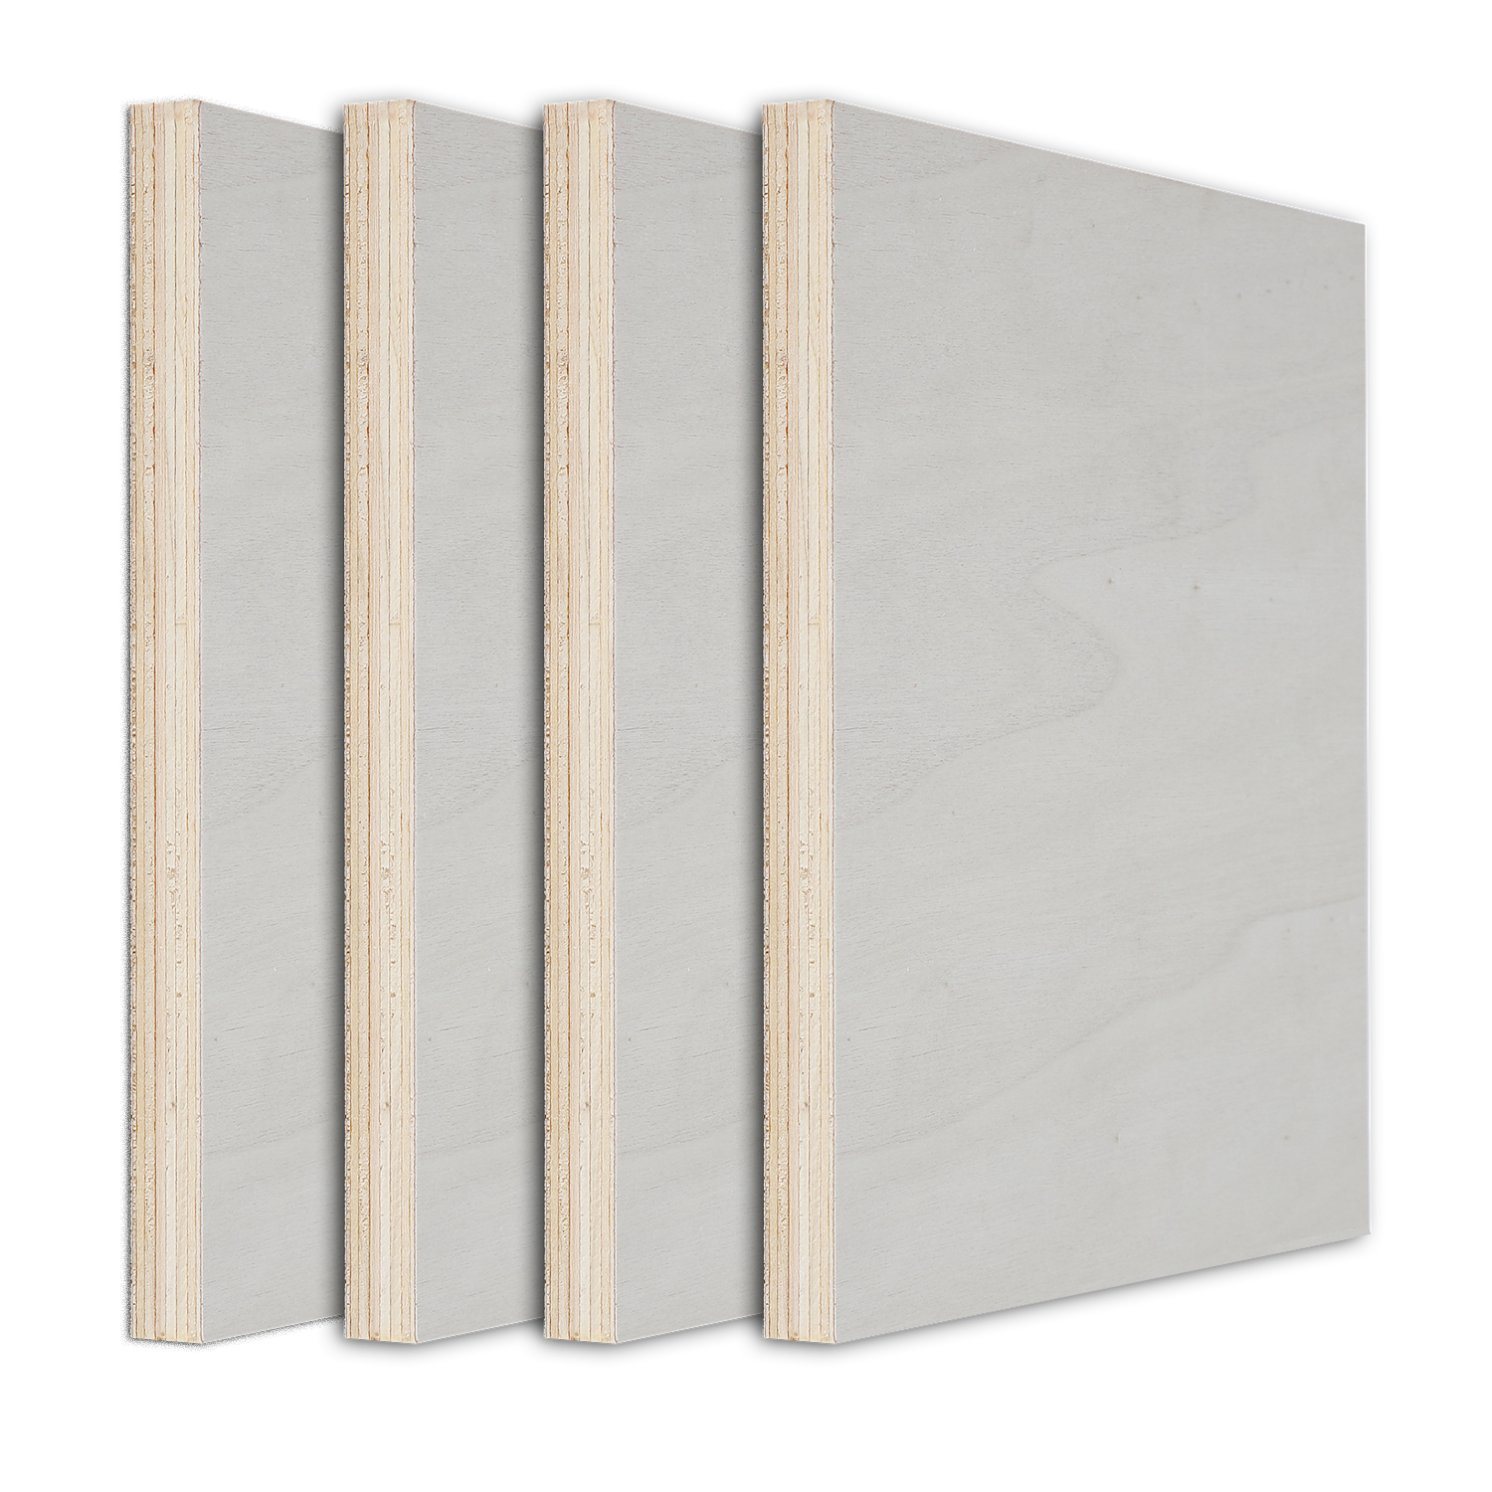 White Commercial Plywood Poplar Plywood for Home Decoration